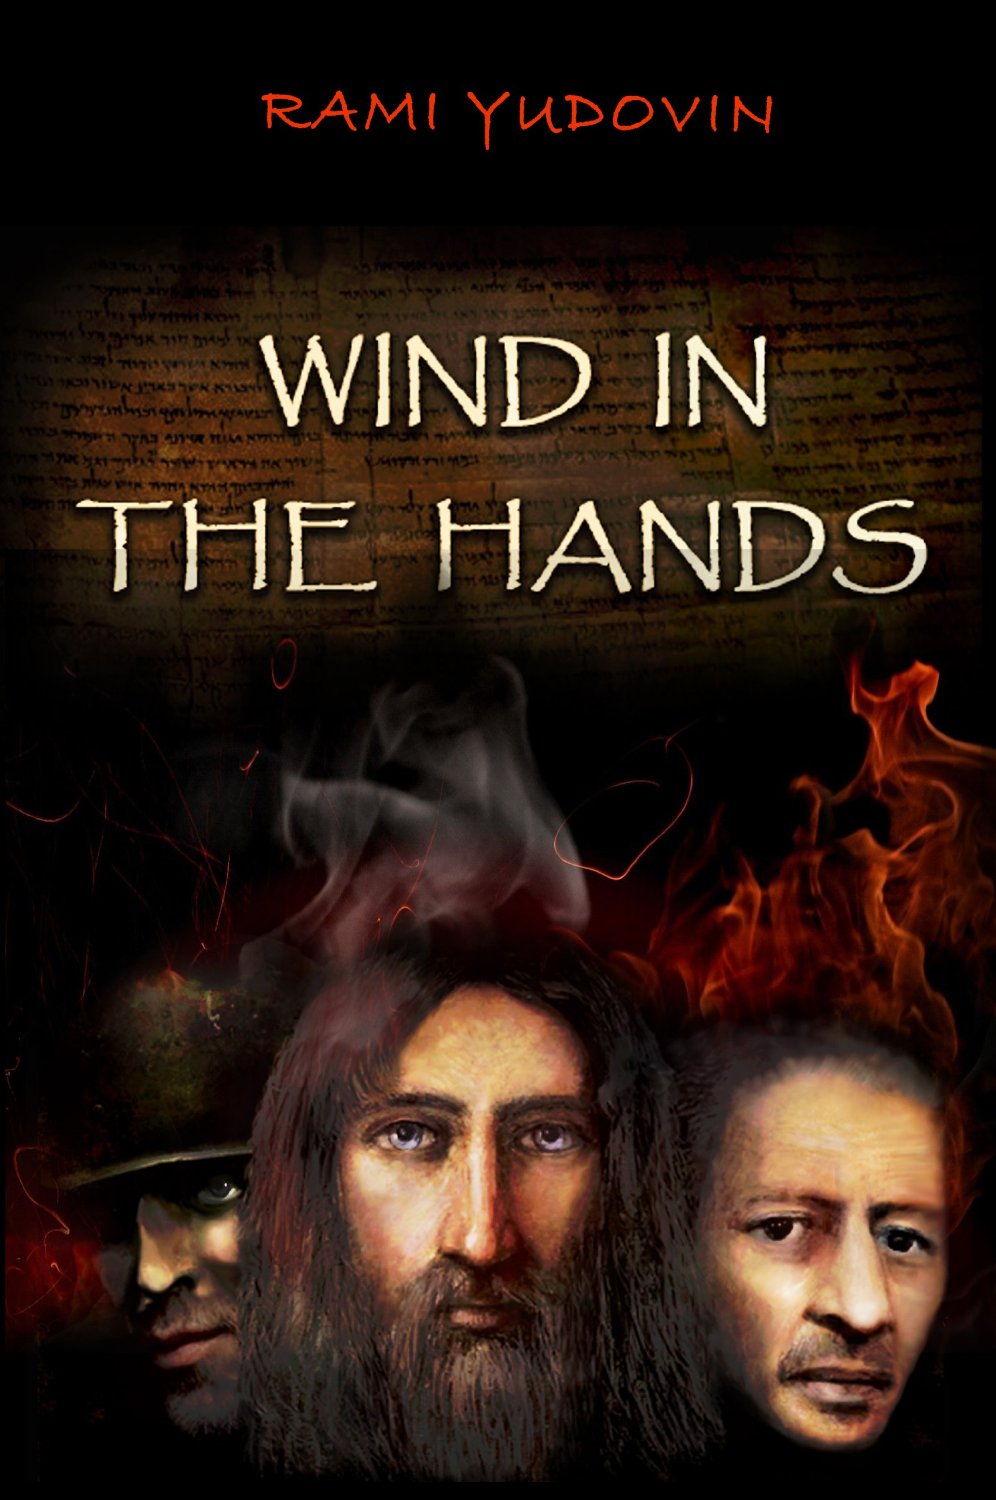 Wind in the Hands by Yudovun Rami